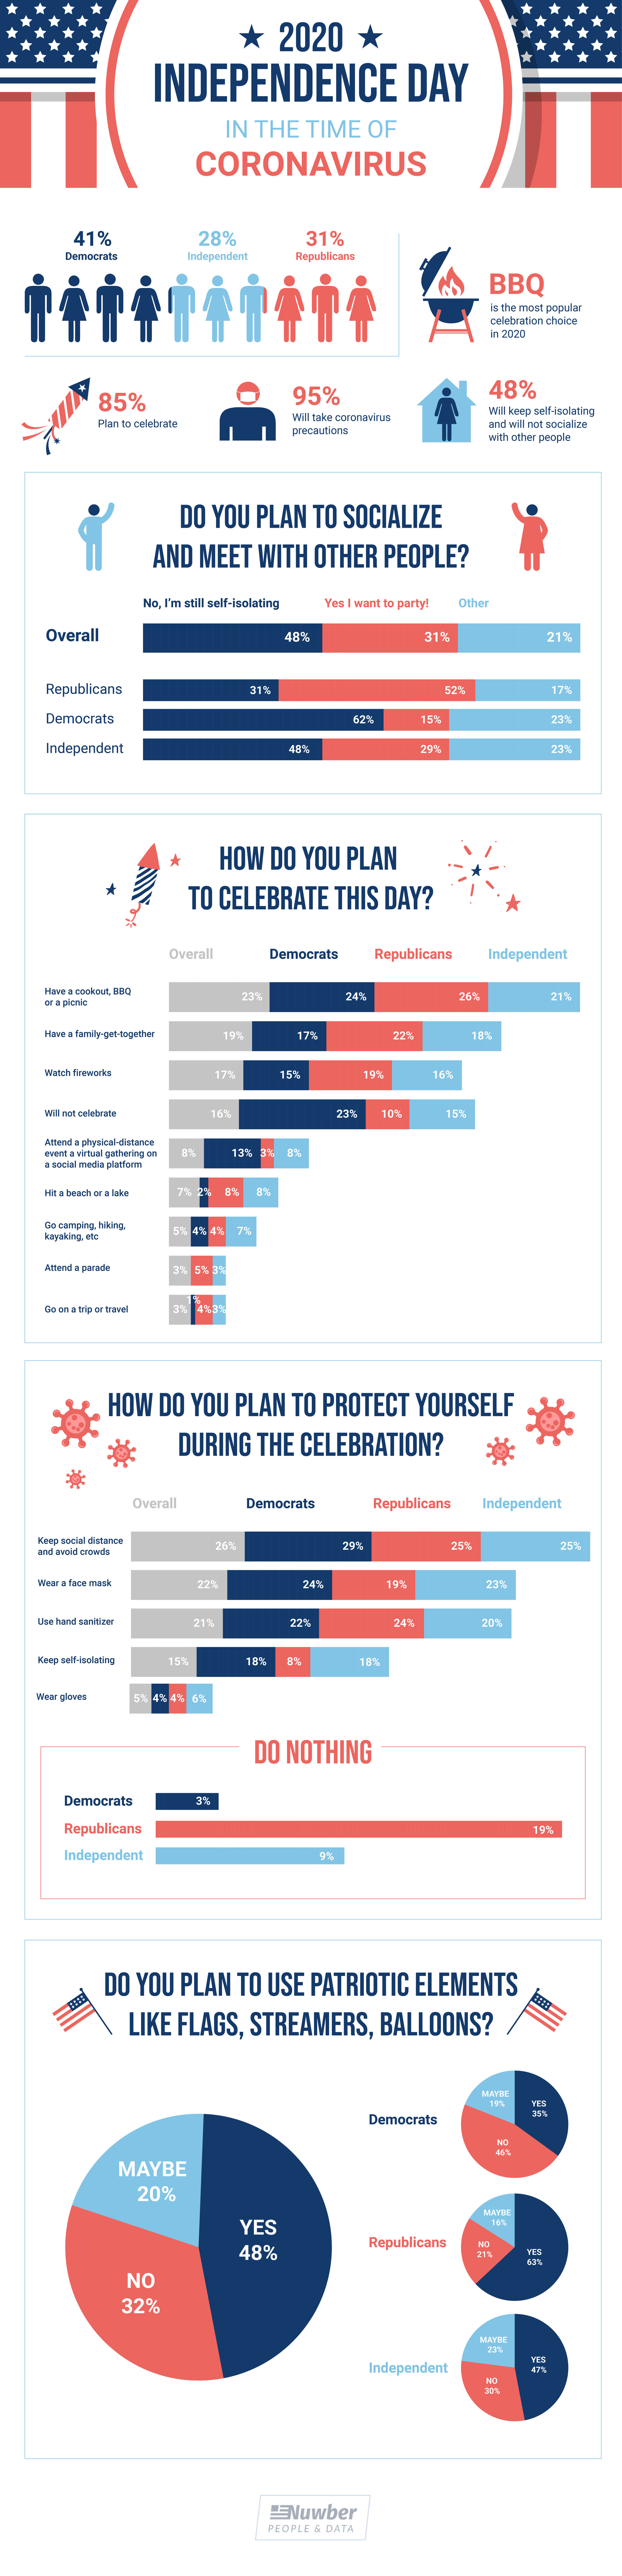 Infographic depicting differences in how people plan to celebrate the Fourth of July this year, depending on their political party affiliation